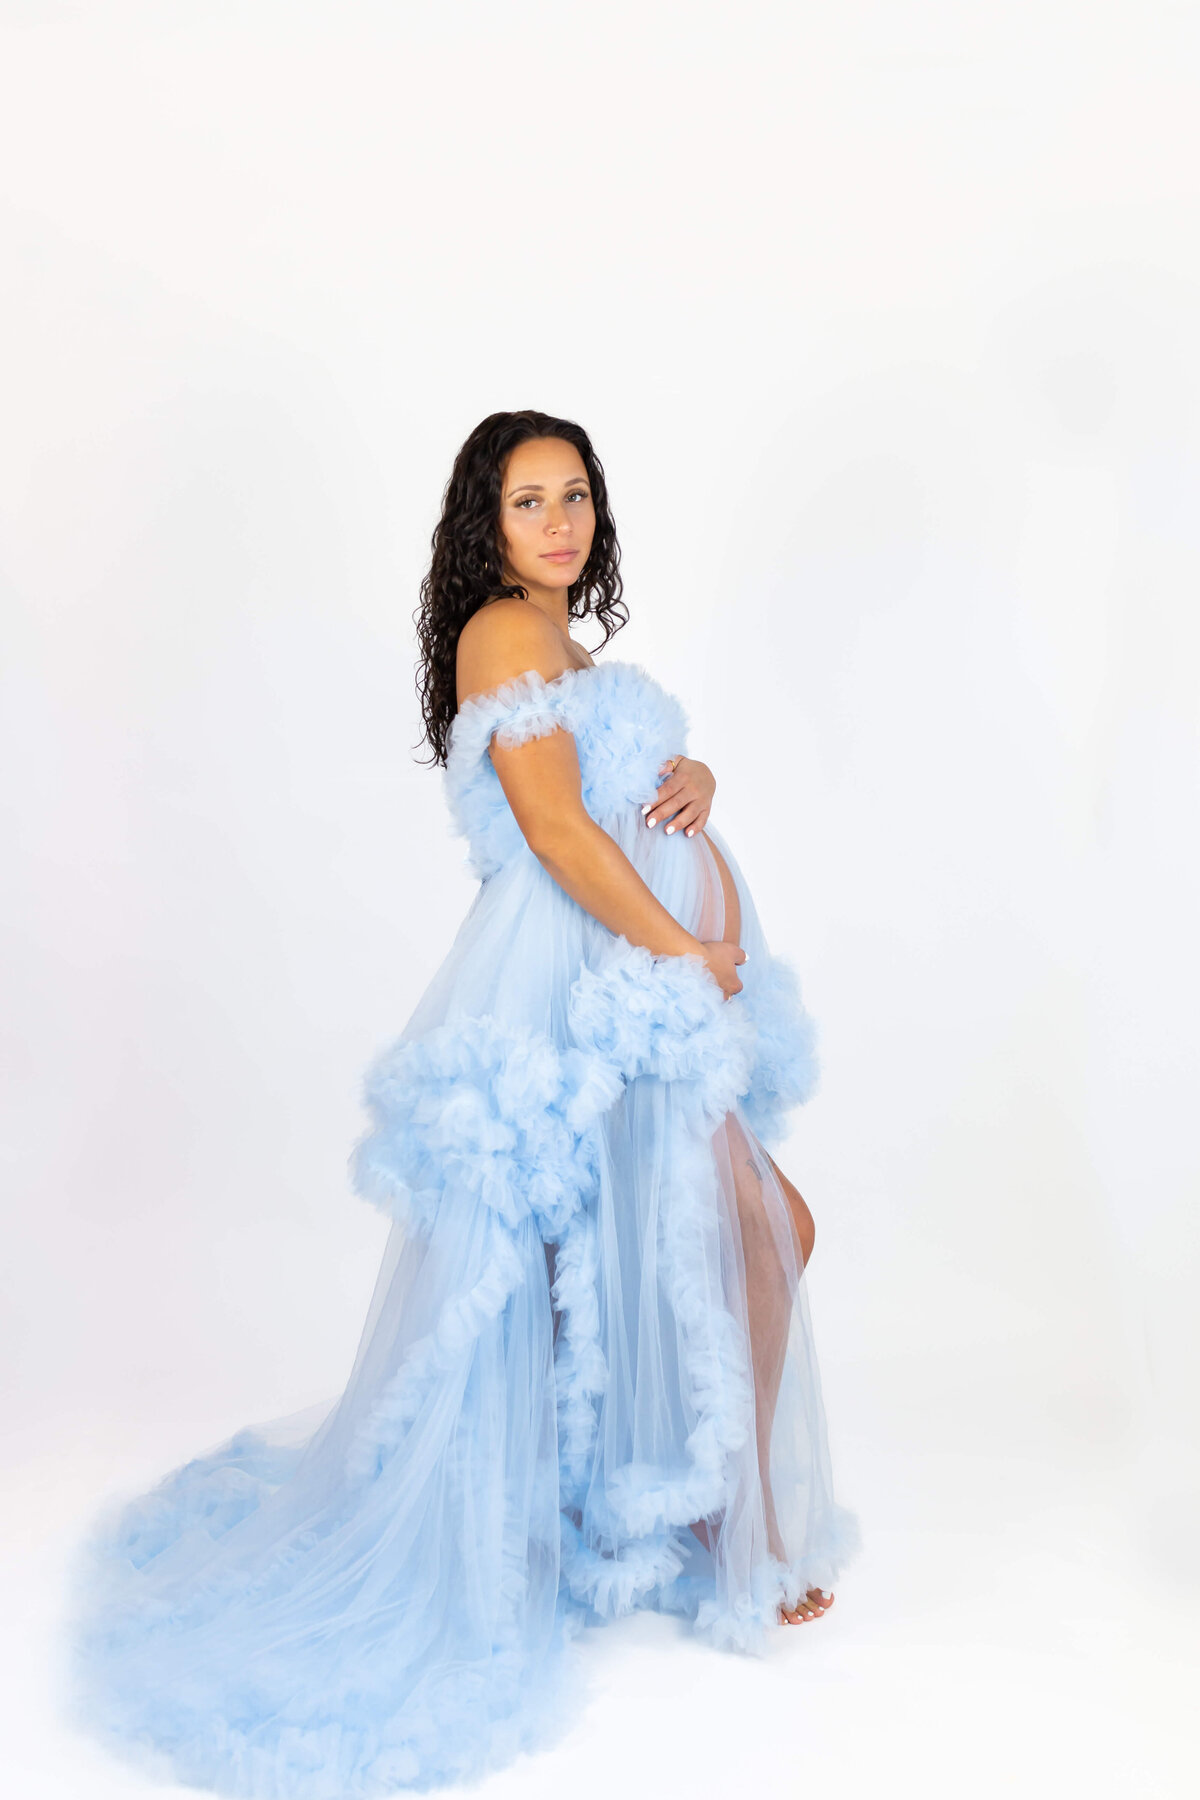 Studio maternity photoshoot in gown00008